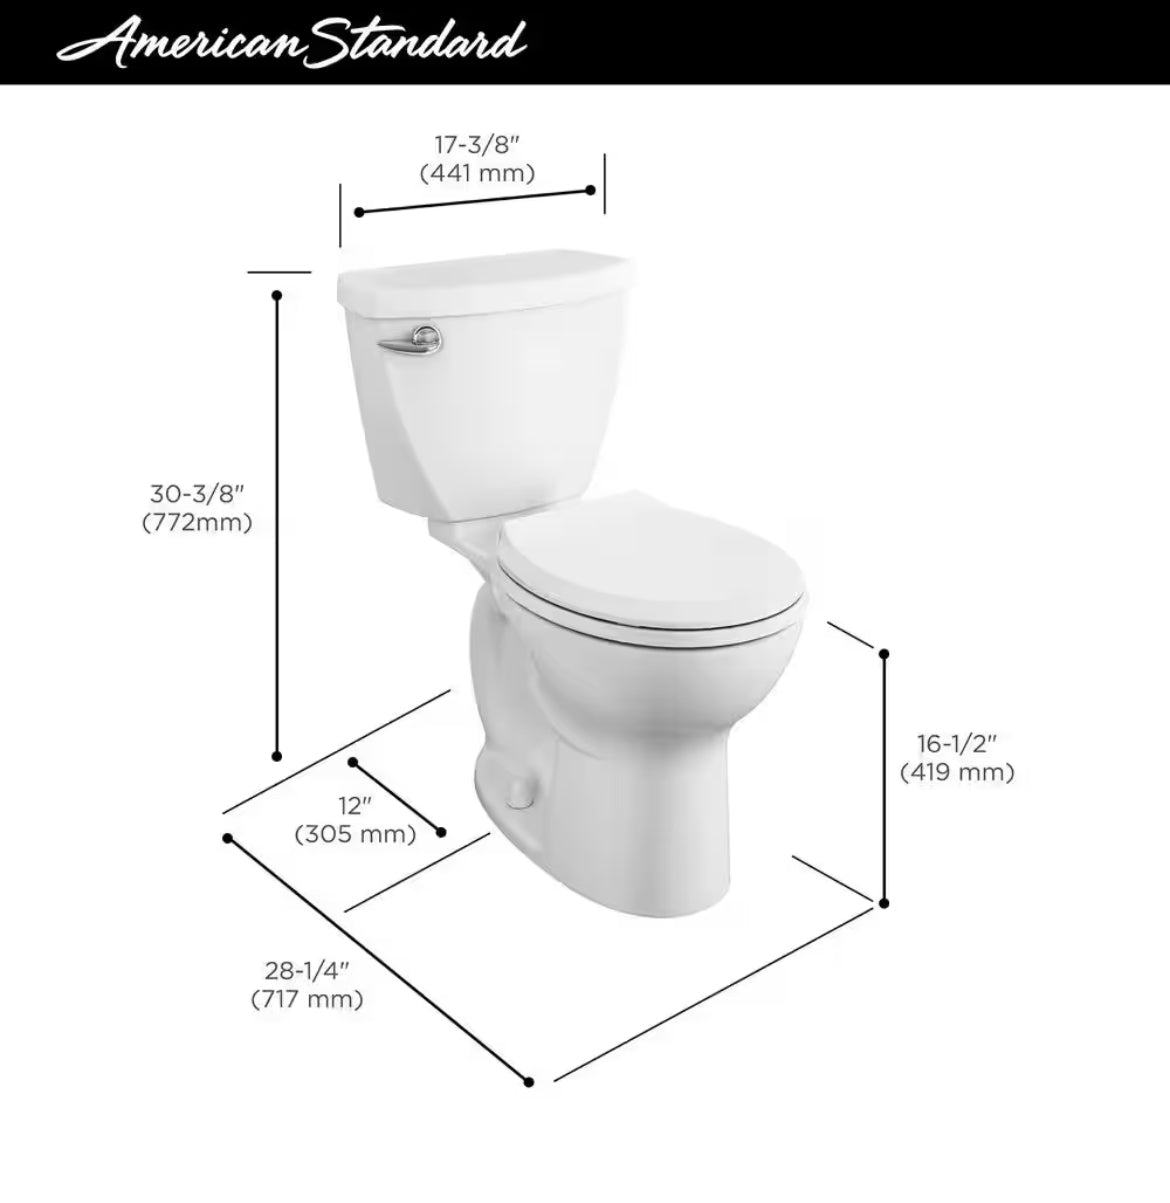 Cadet 3 Two-Piece 1.28 GPF Single Flush Round Chair Height Toilet with Slow-Close Seat in White